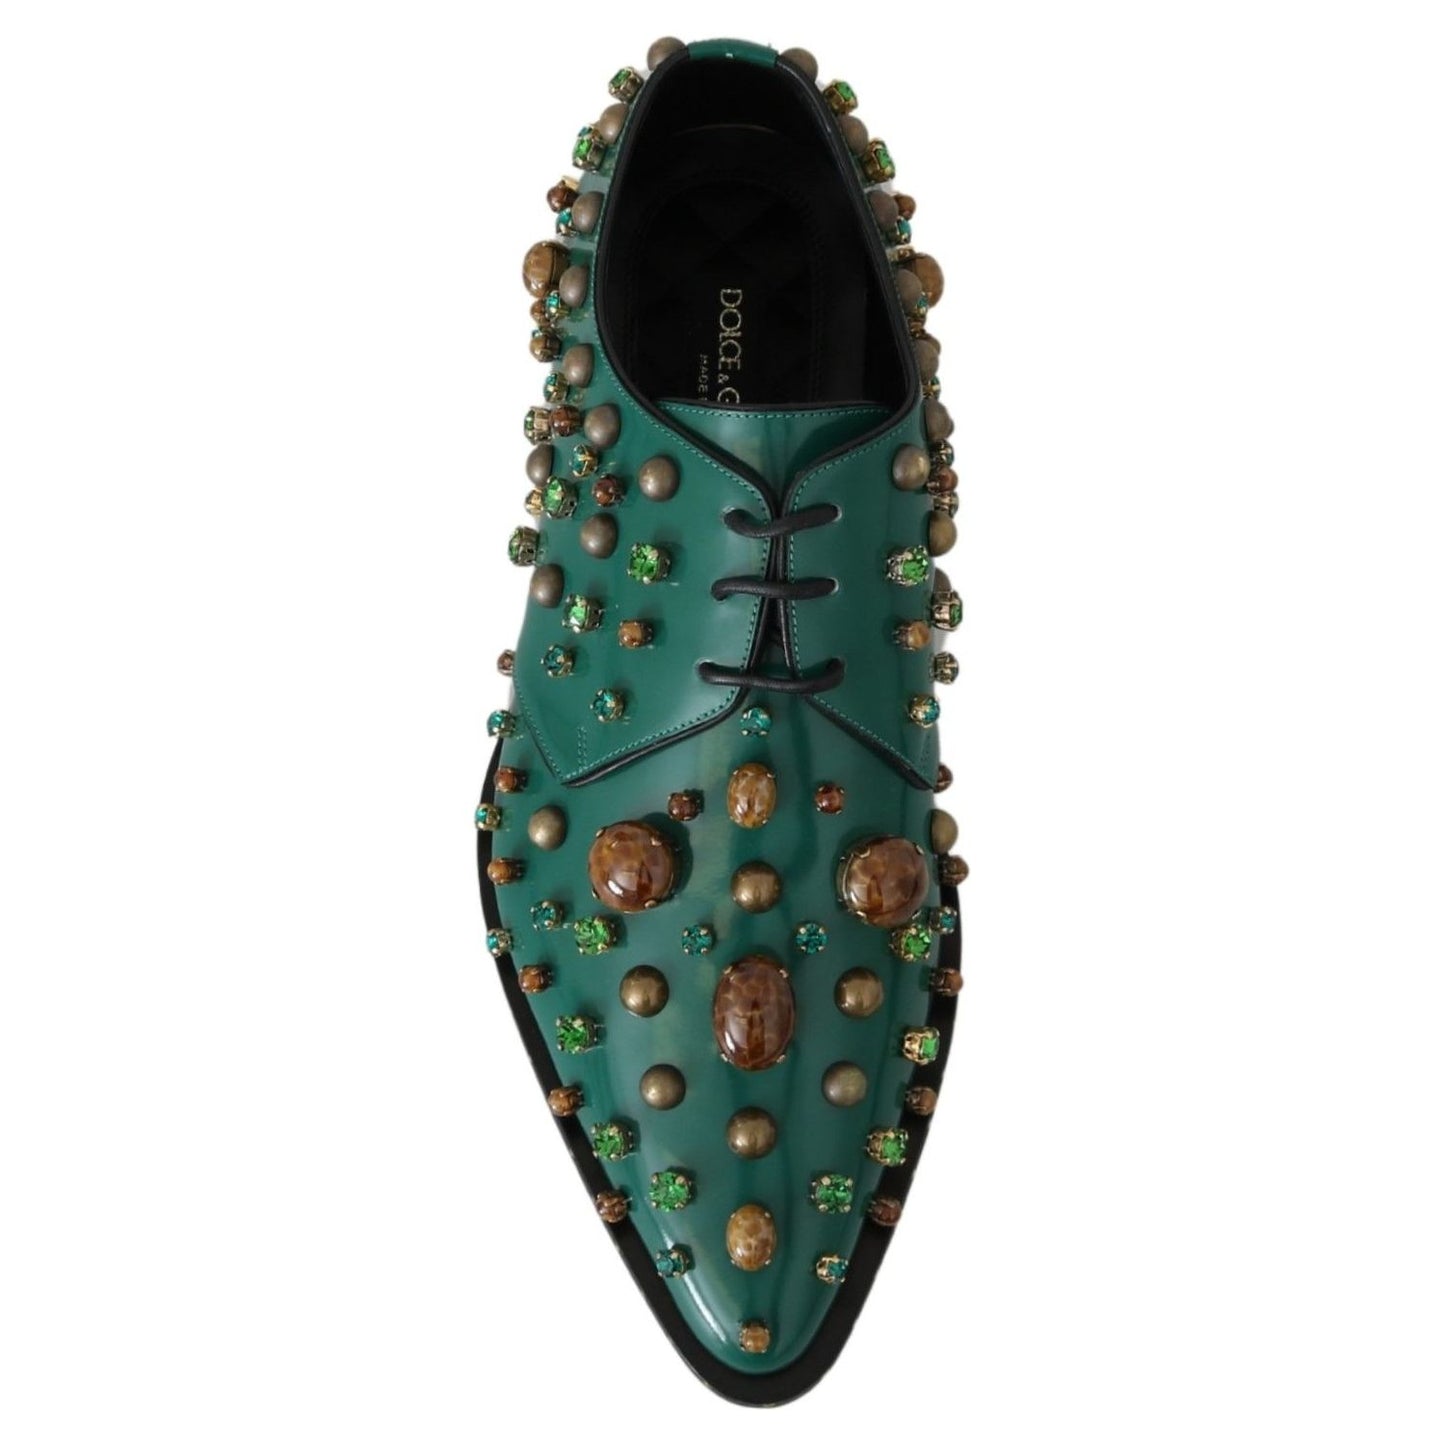 Dolce & Gabbana Emerald Leather Dress Shoes with Crystal Accents green-leather-crystal-dress-broque-shoes IMG_1560-ce5f5855-fd1.jpg